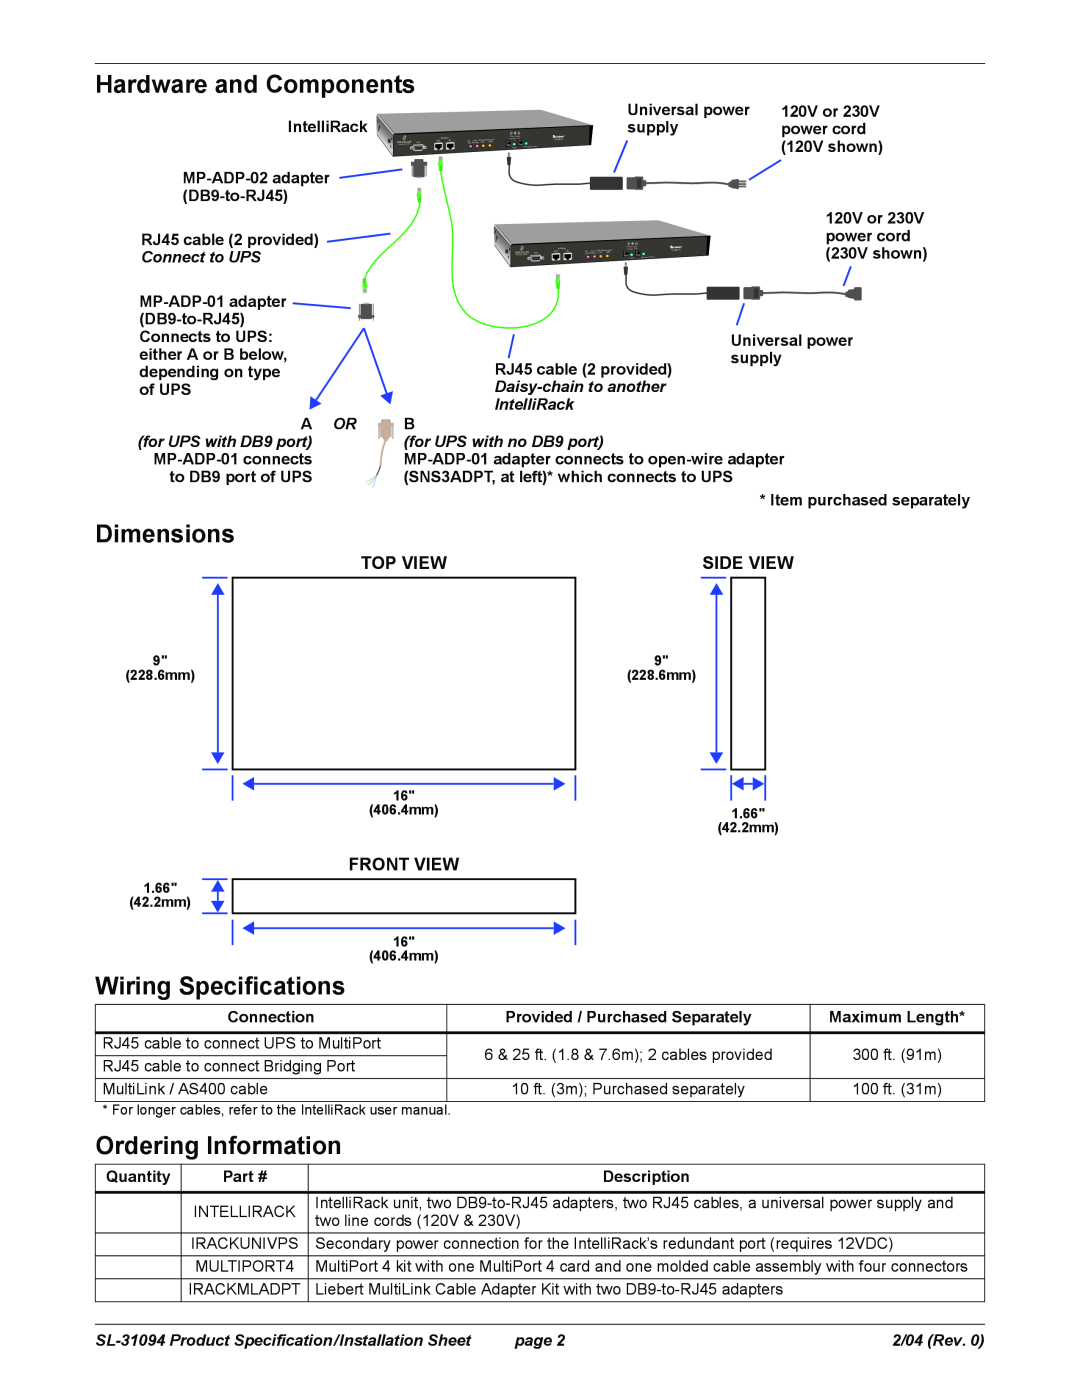 Liebert IntelliRack Hardware and Components, Dimensions, Wiring Specifications, Ordering Information, Top View, Side View 